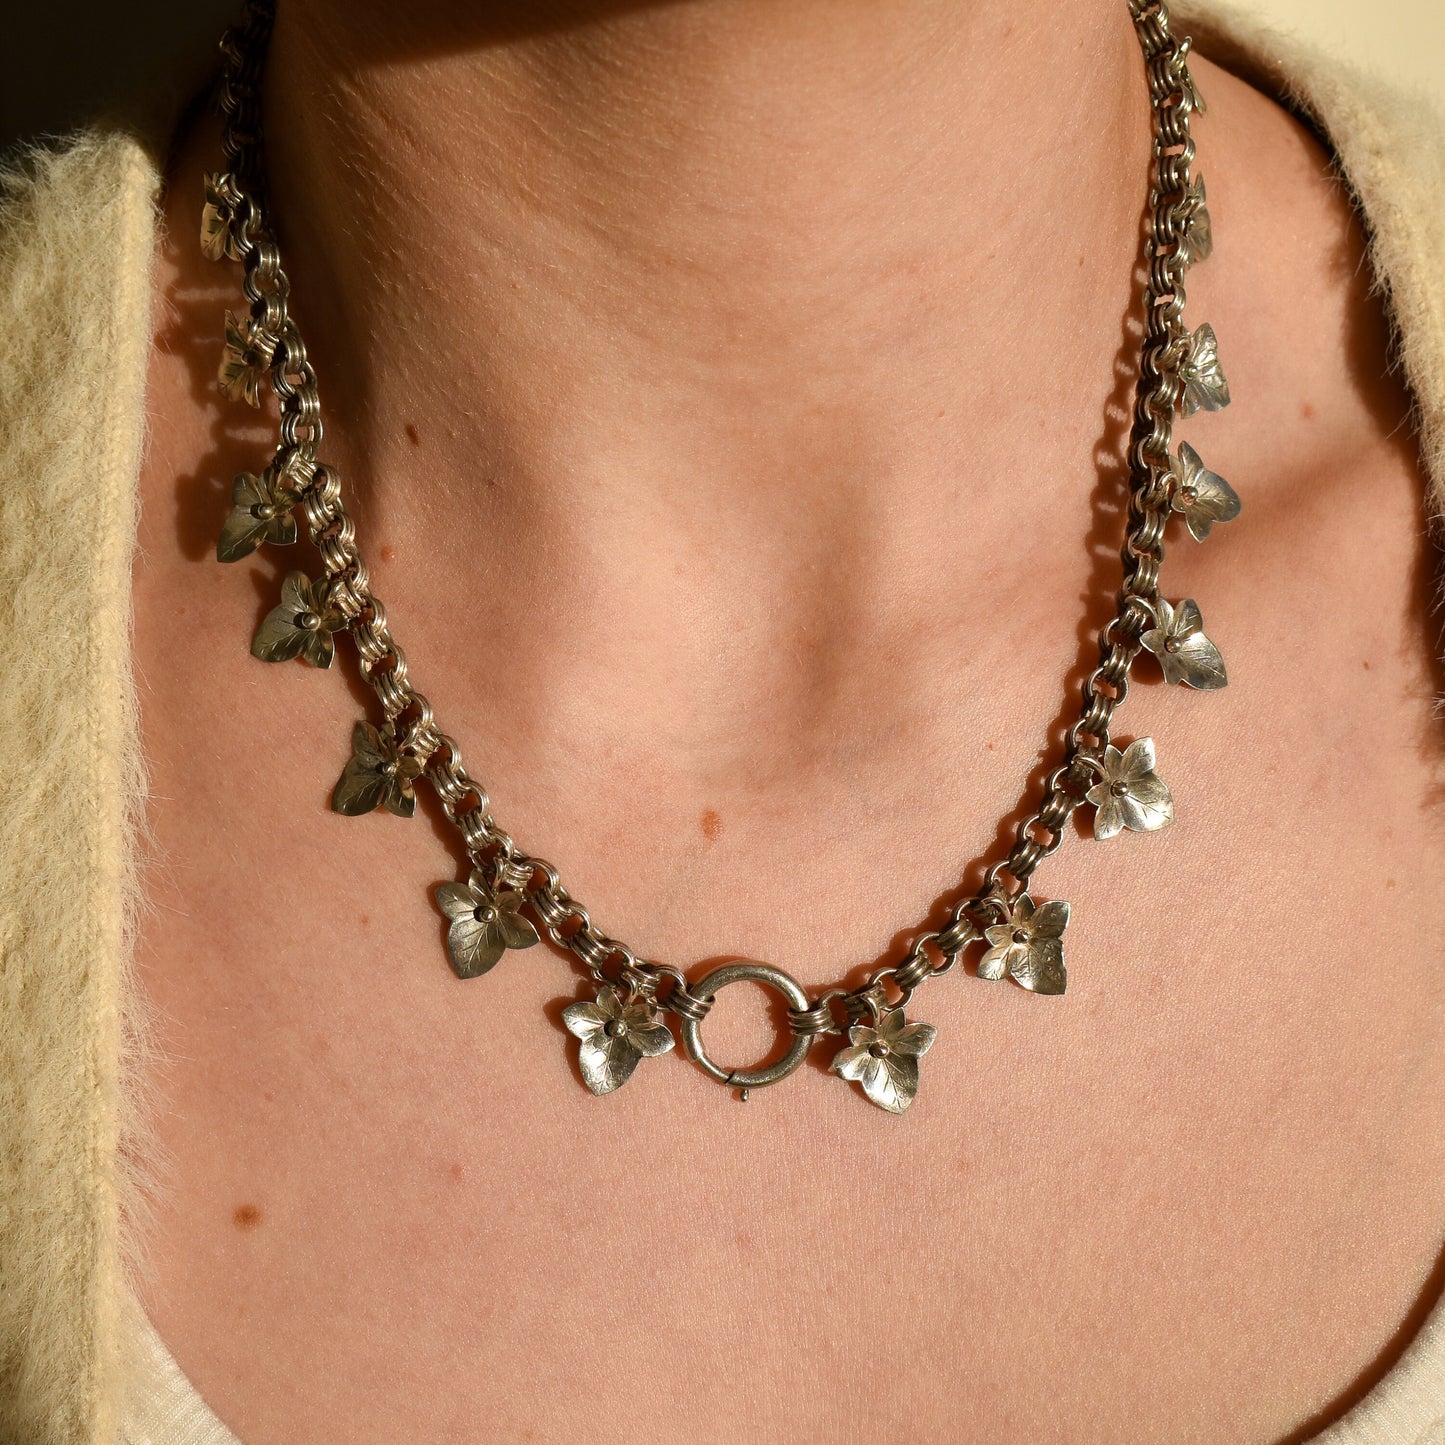 Antique Victorian Aesthetic Ivy Leaf Sterling Silver Chain Collar Necklace | 17" with Bolt Ring